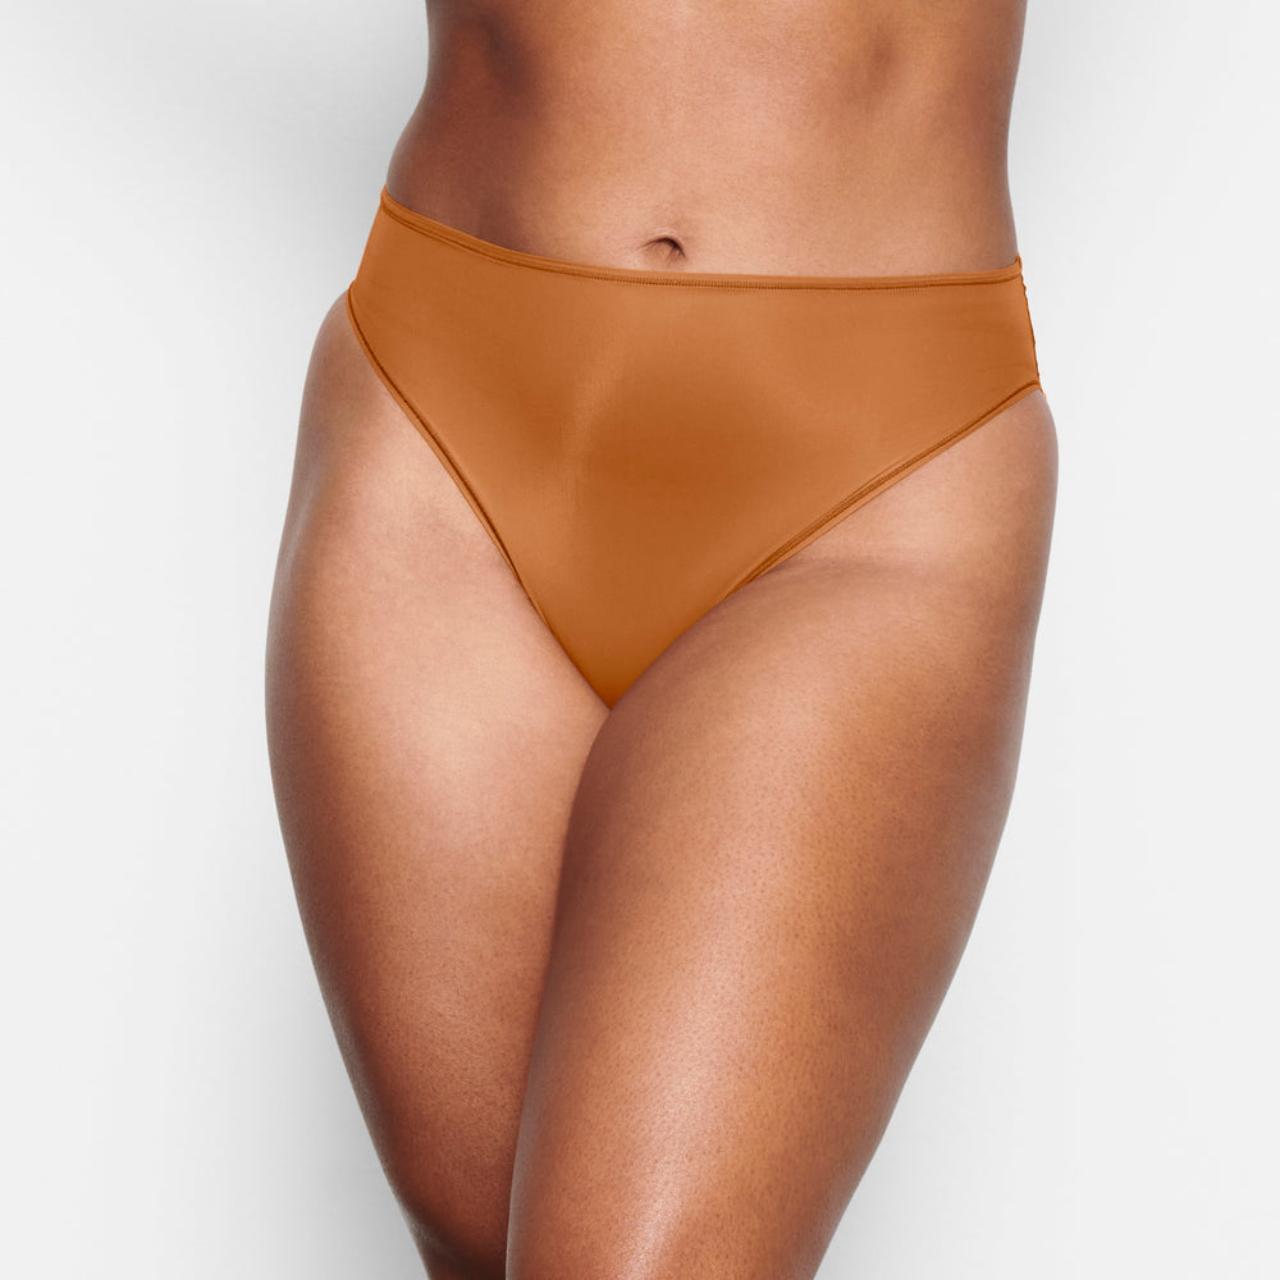 Tan Jelly Sheer Cheeky Briefs by SKIMS on Sale